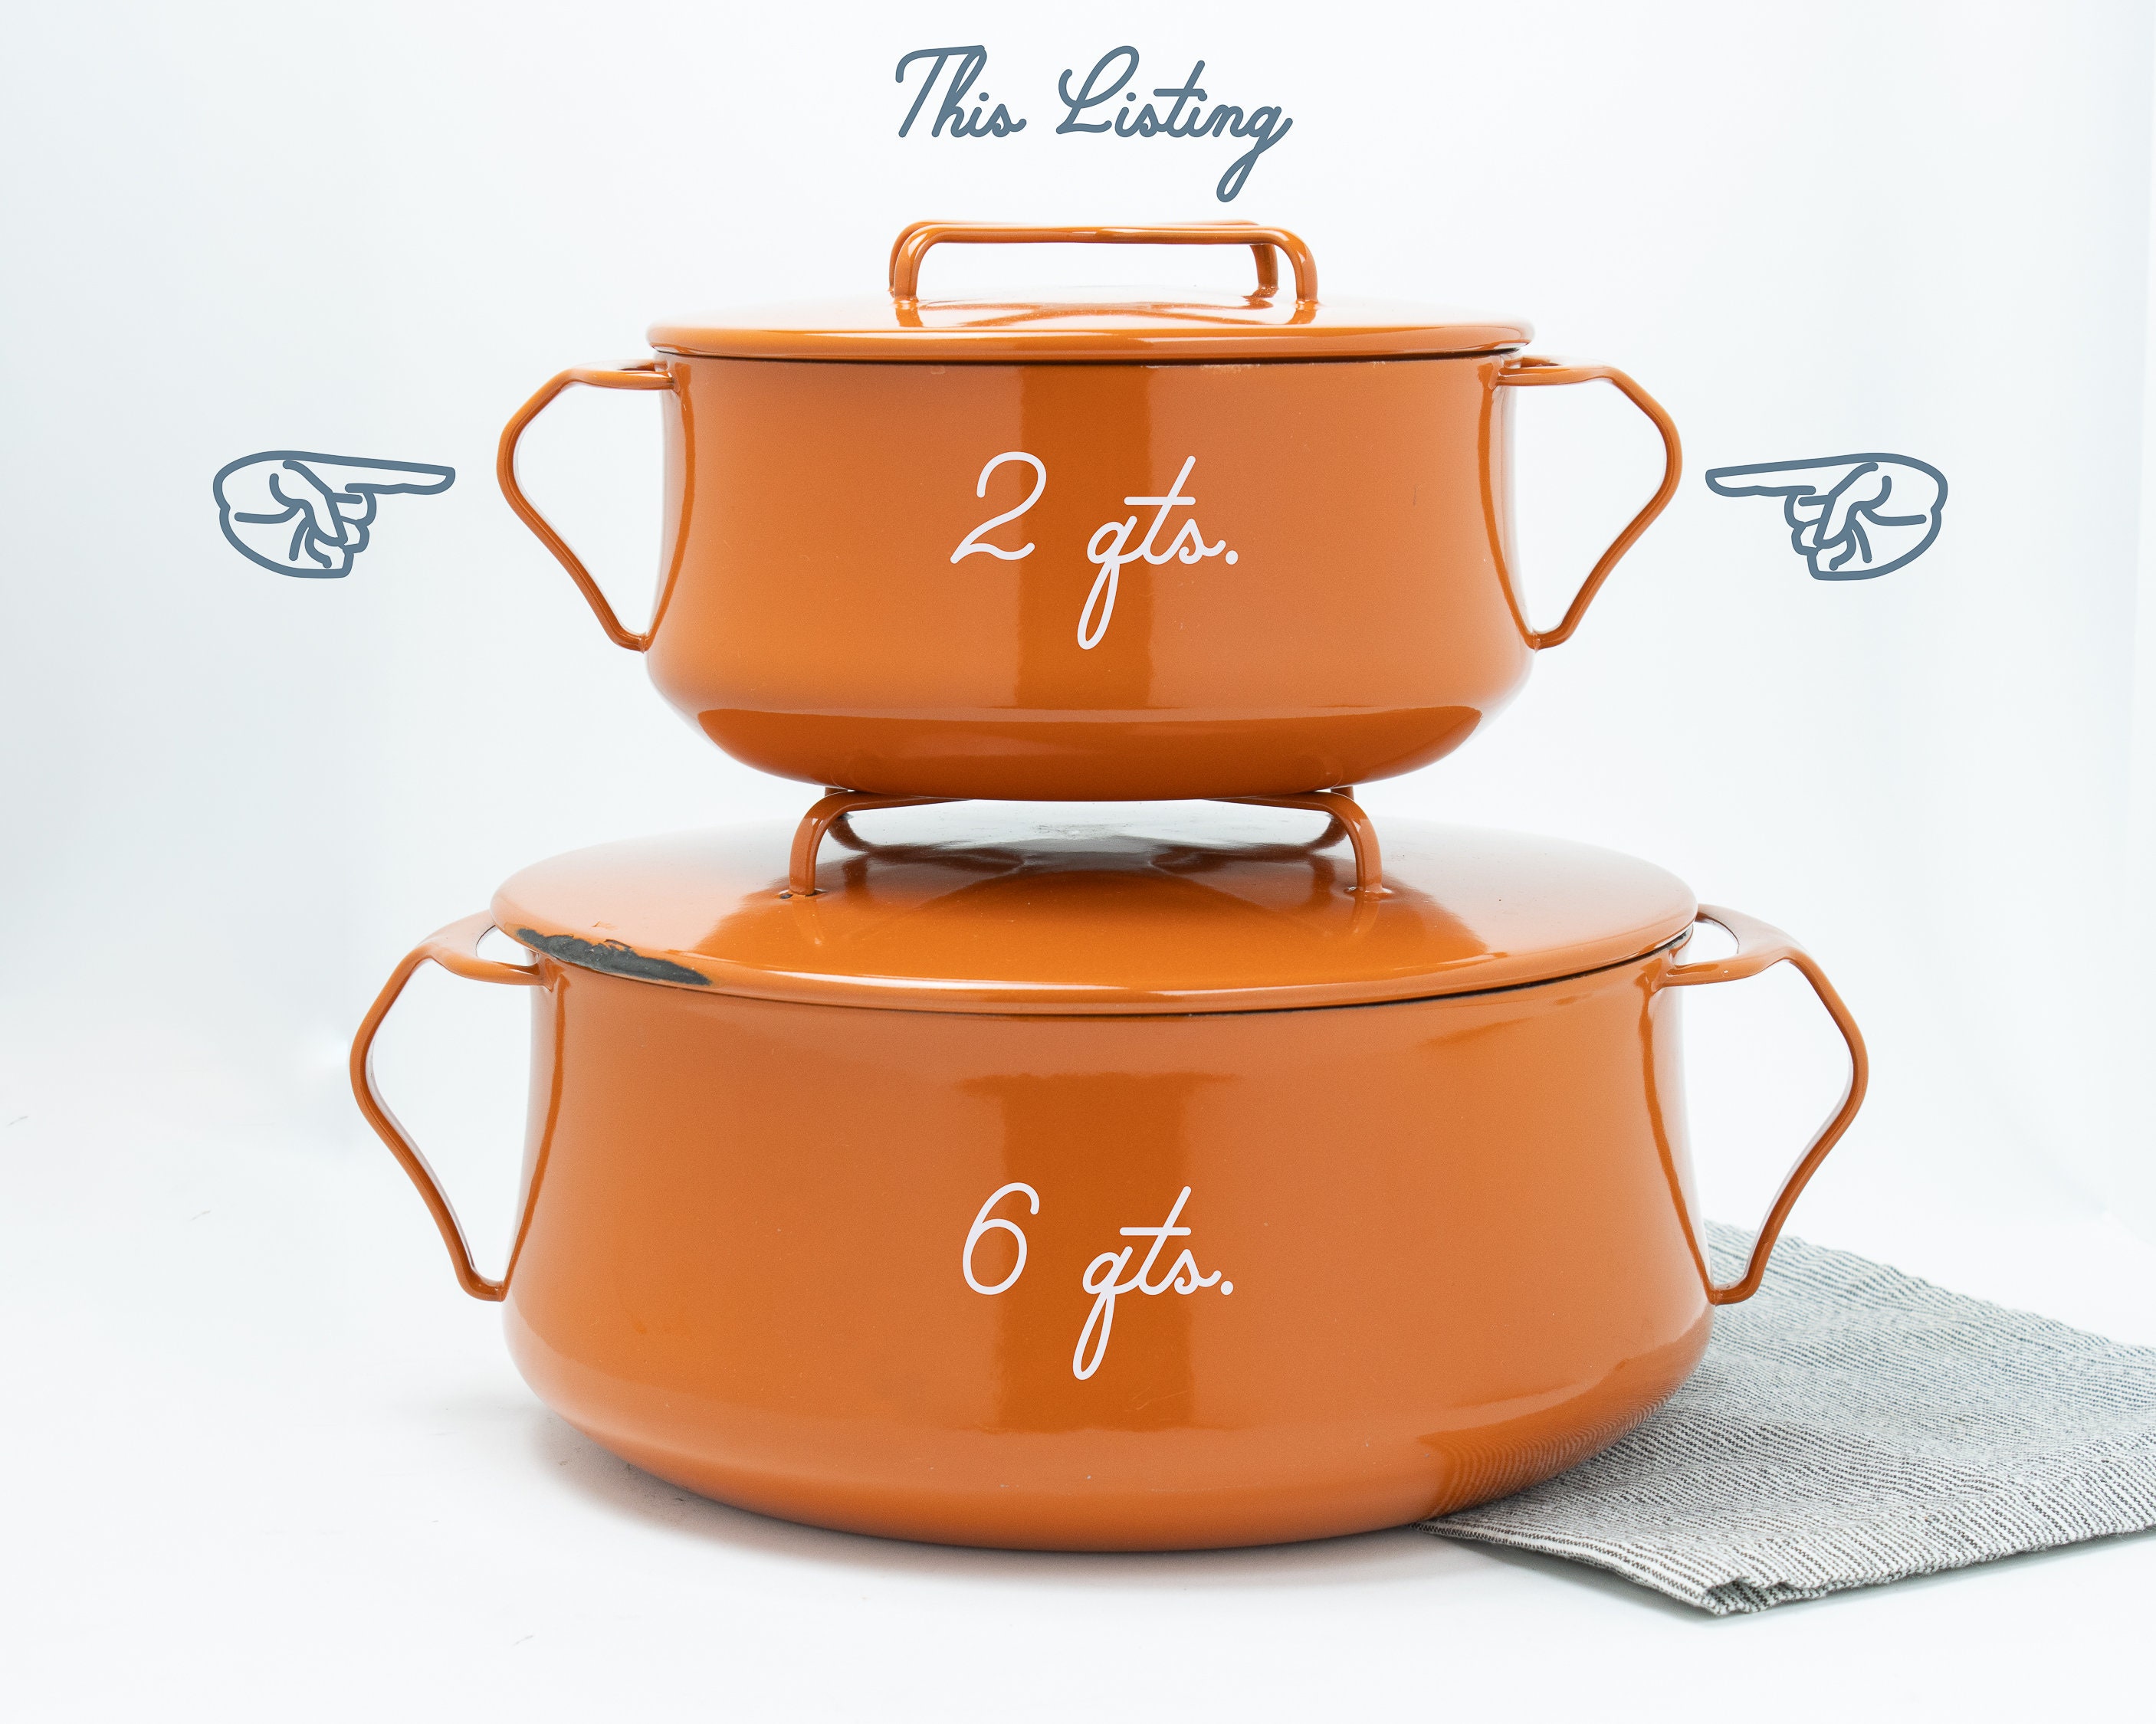 Tyler Dogwood Dutch Oven Cookers